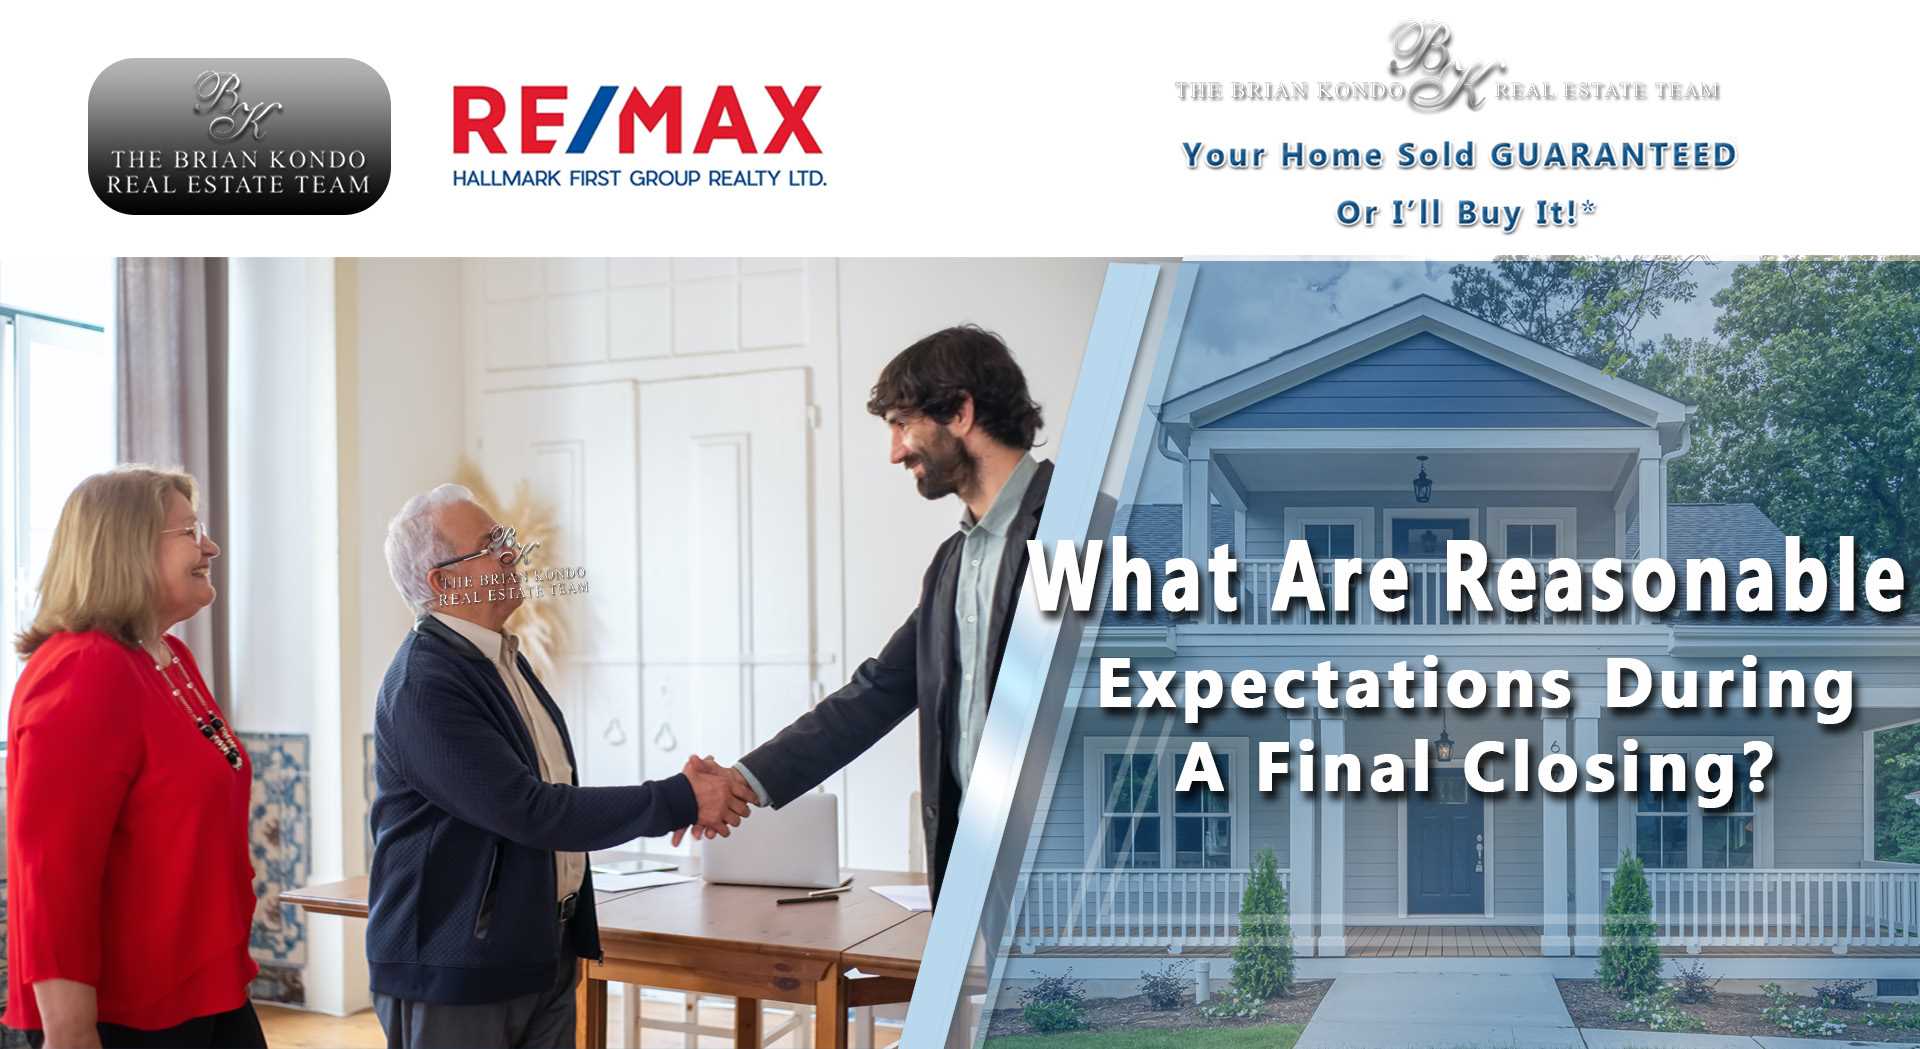 What Are Reasonable Expectations During A Final Closing?